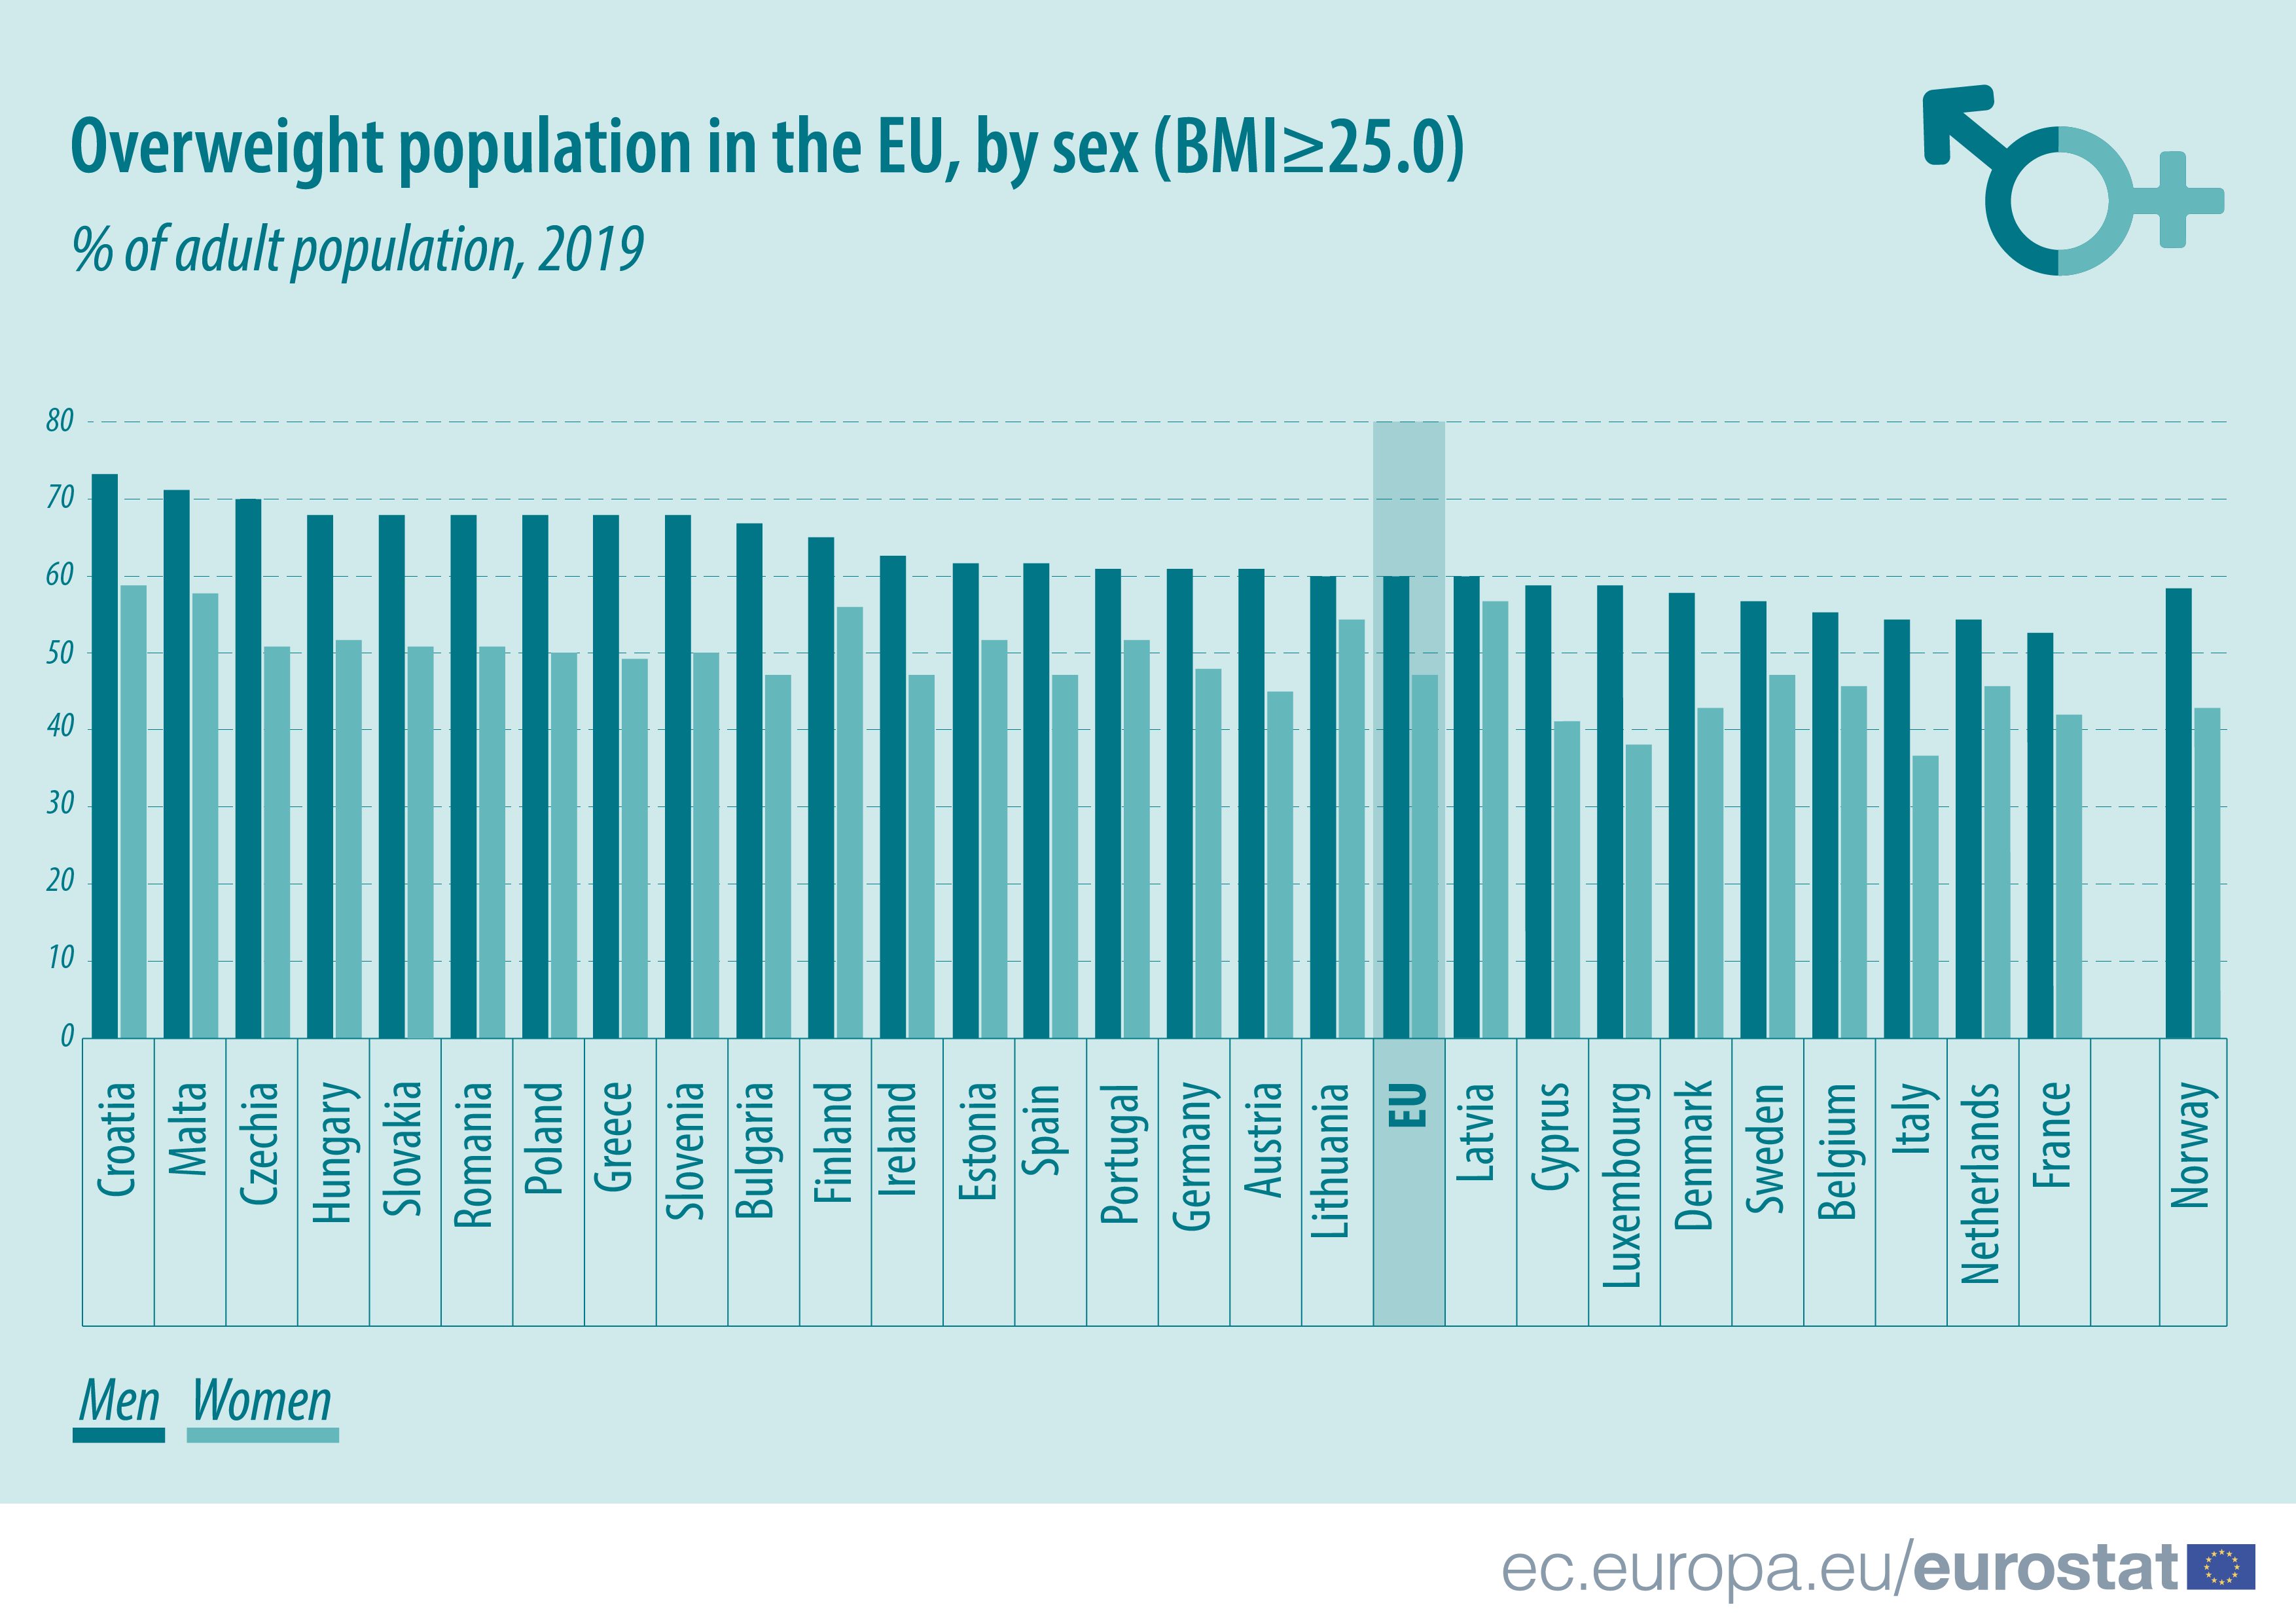 Bar chart: Share of overweight adults in 2019, by sex, in EU/EFTA countries with available data